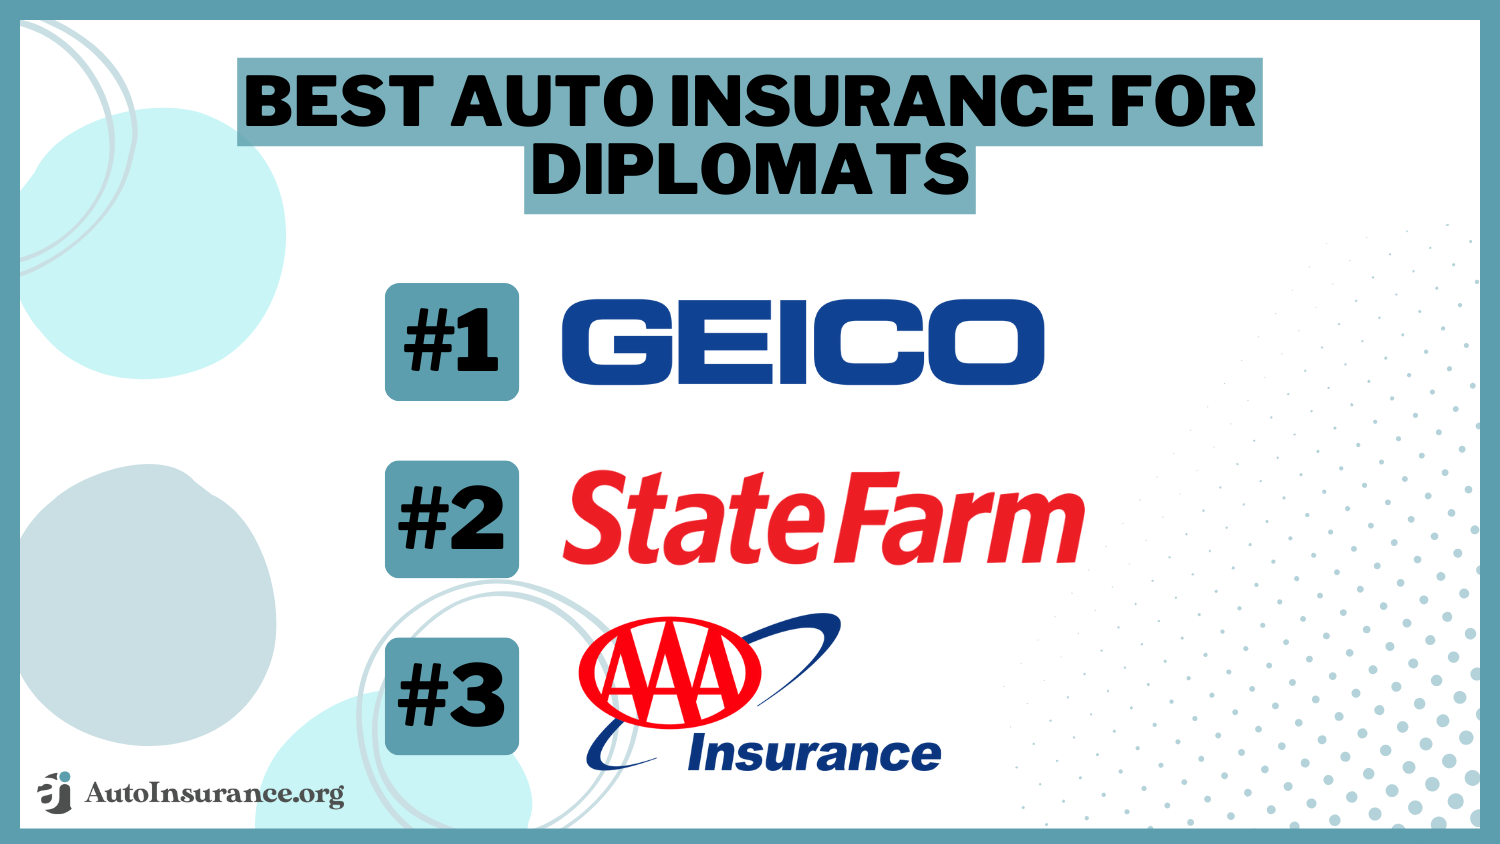 Geico state farm AAA Best Auto Insurance for Diplomats